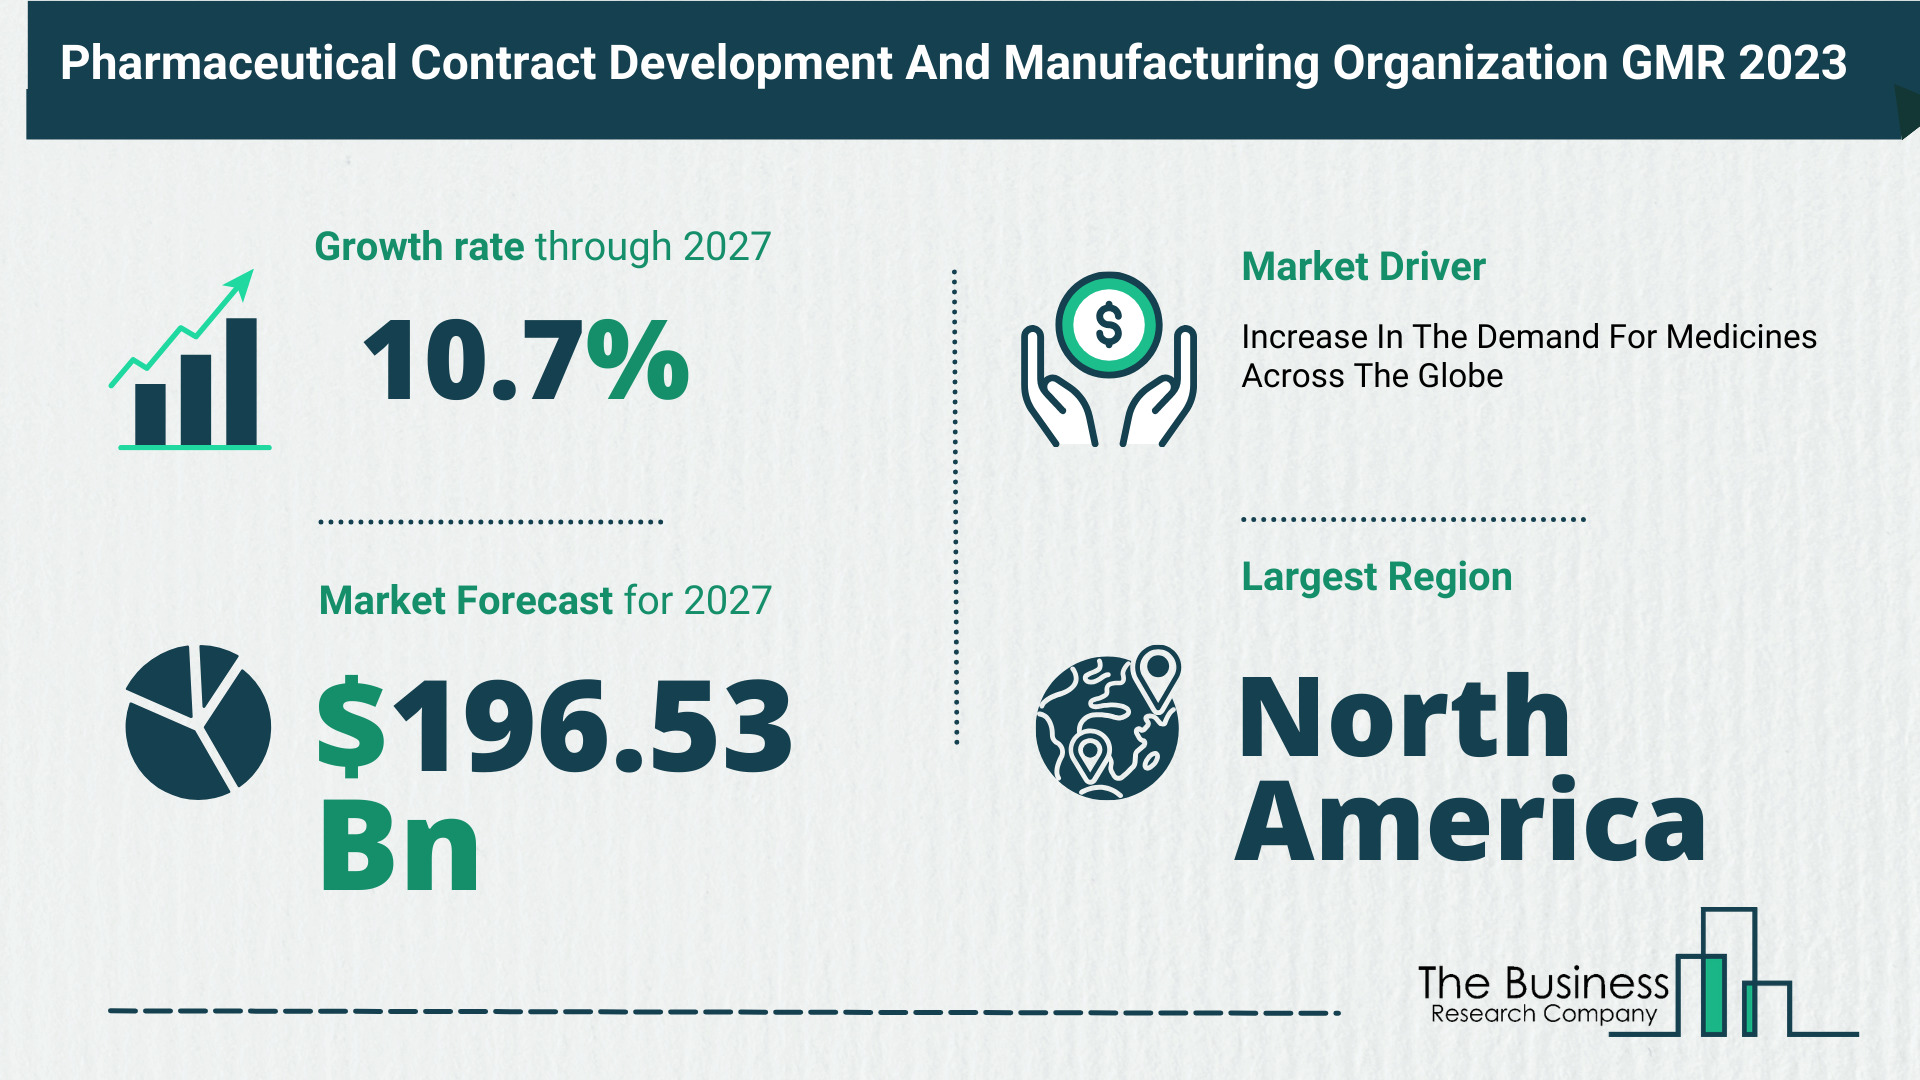 Key Trends And Drivers In The Pharmaceutical Contract Development And Manufacturing Organization (CMO) Market 2023